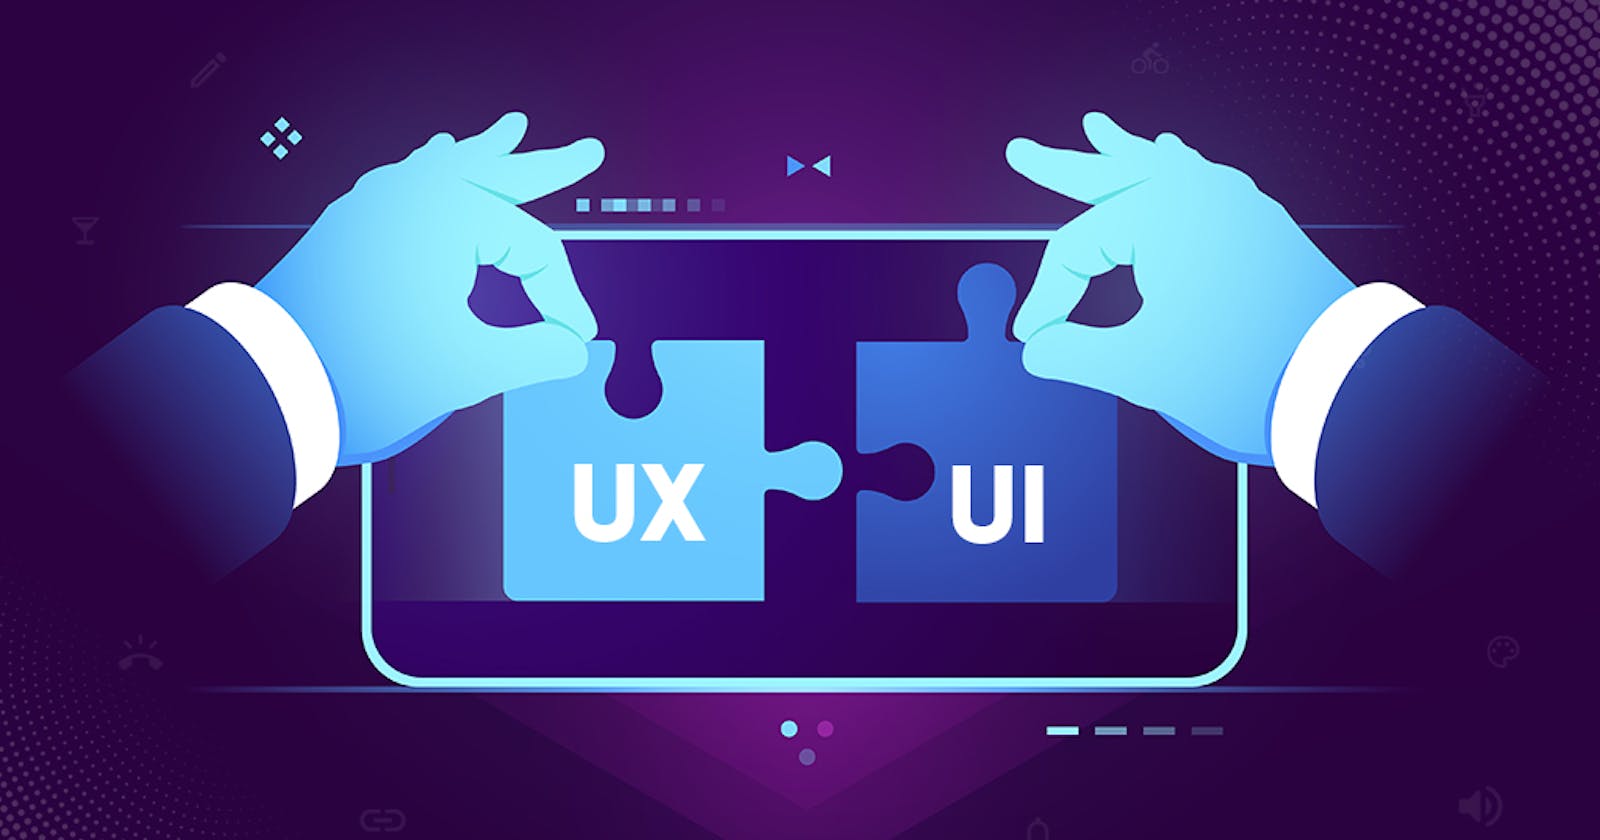 Getting into your UI/UX style